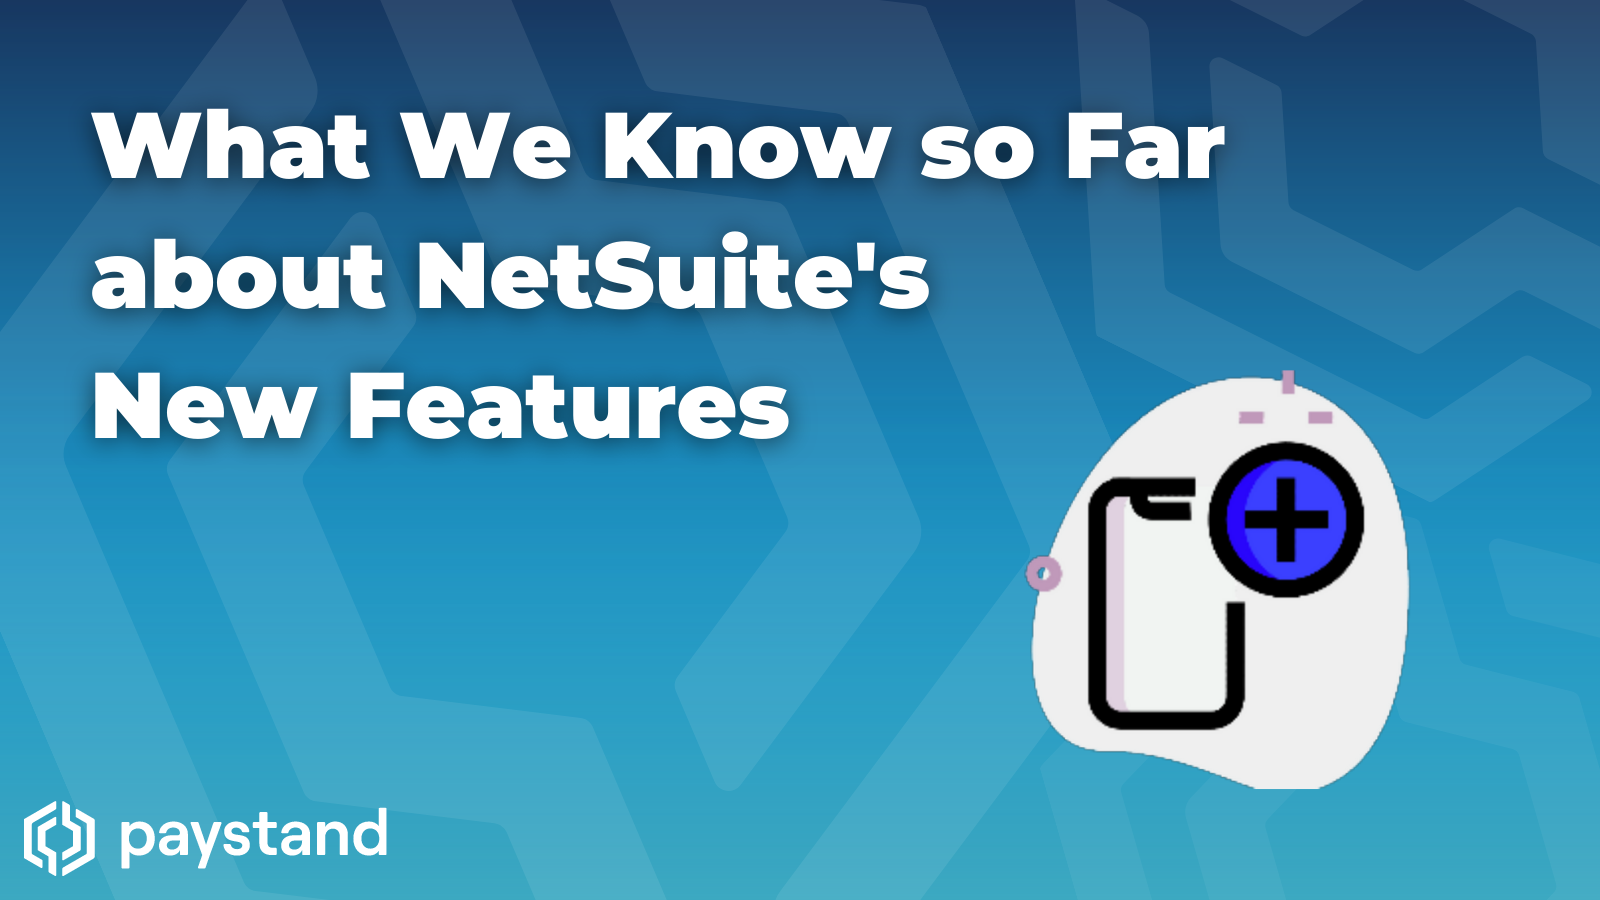 What We Know So Far About NetSuite's New Features